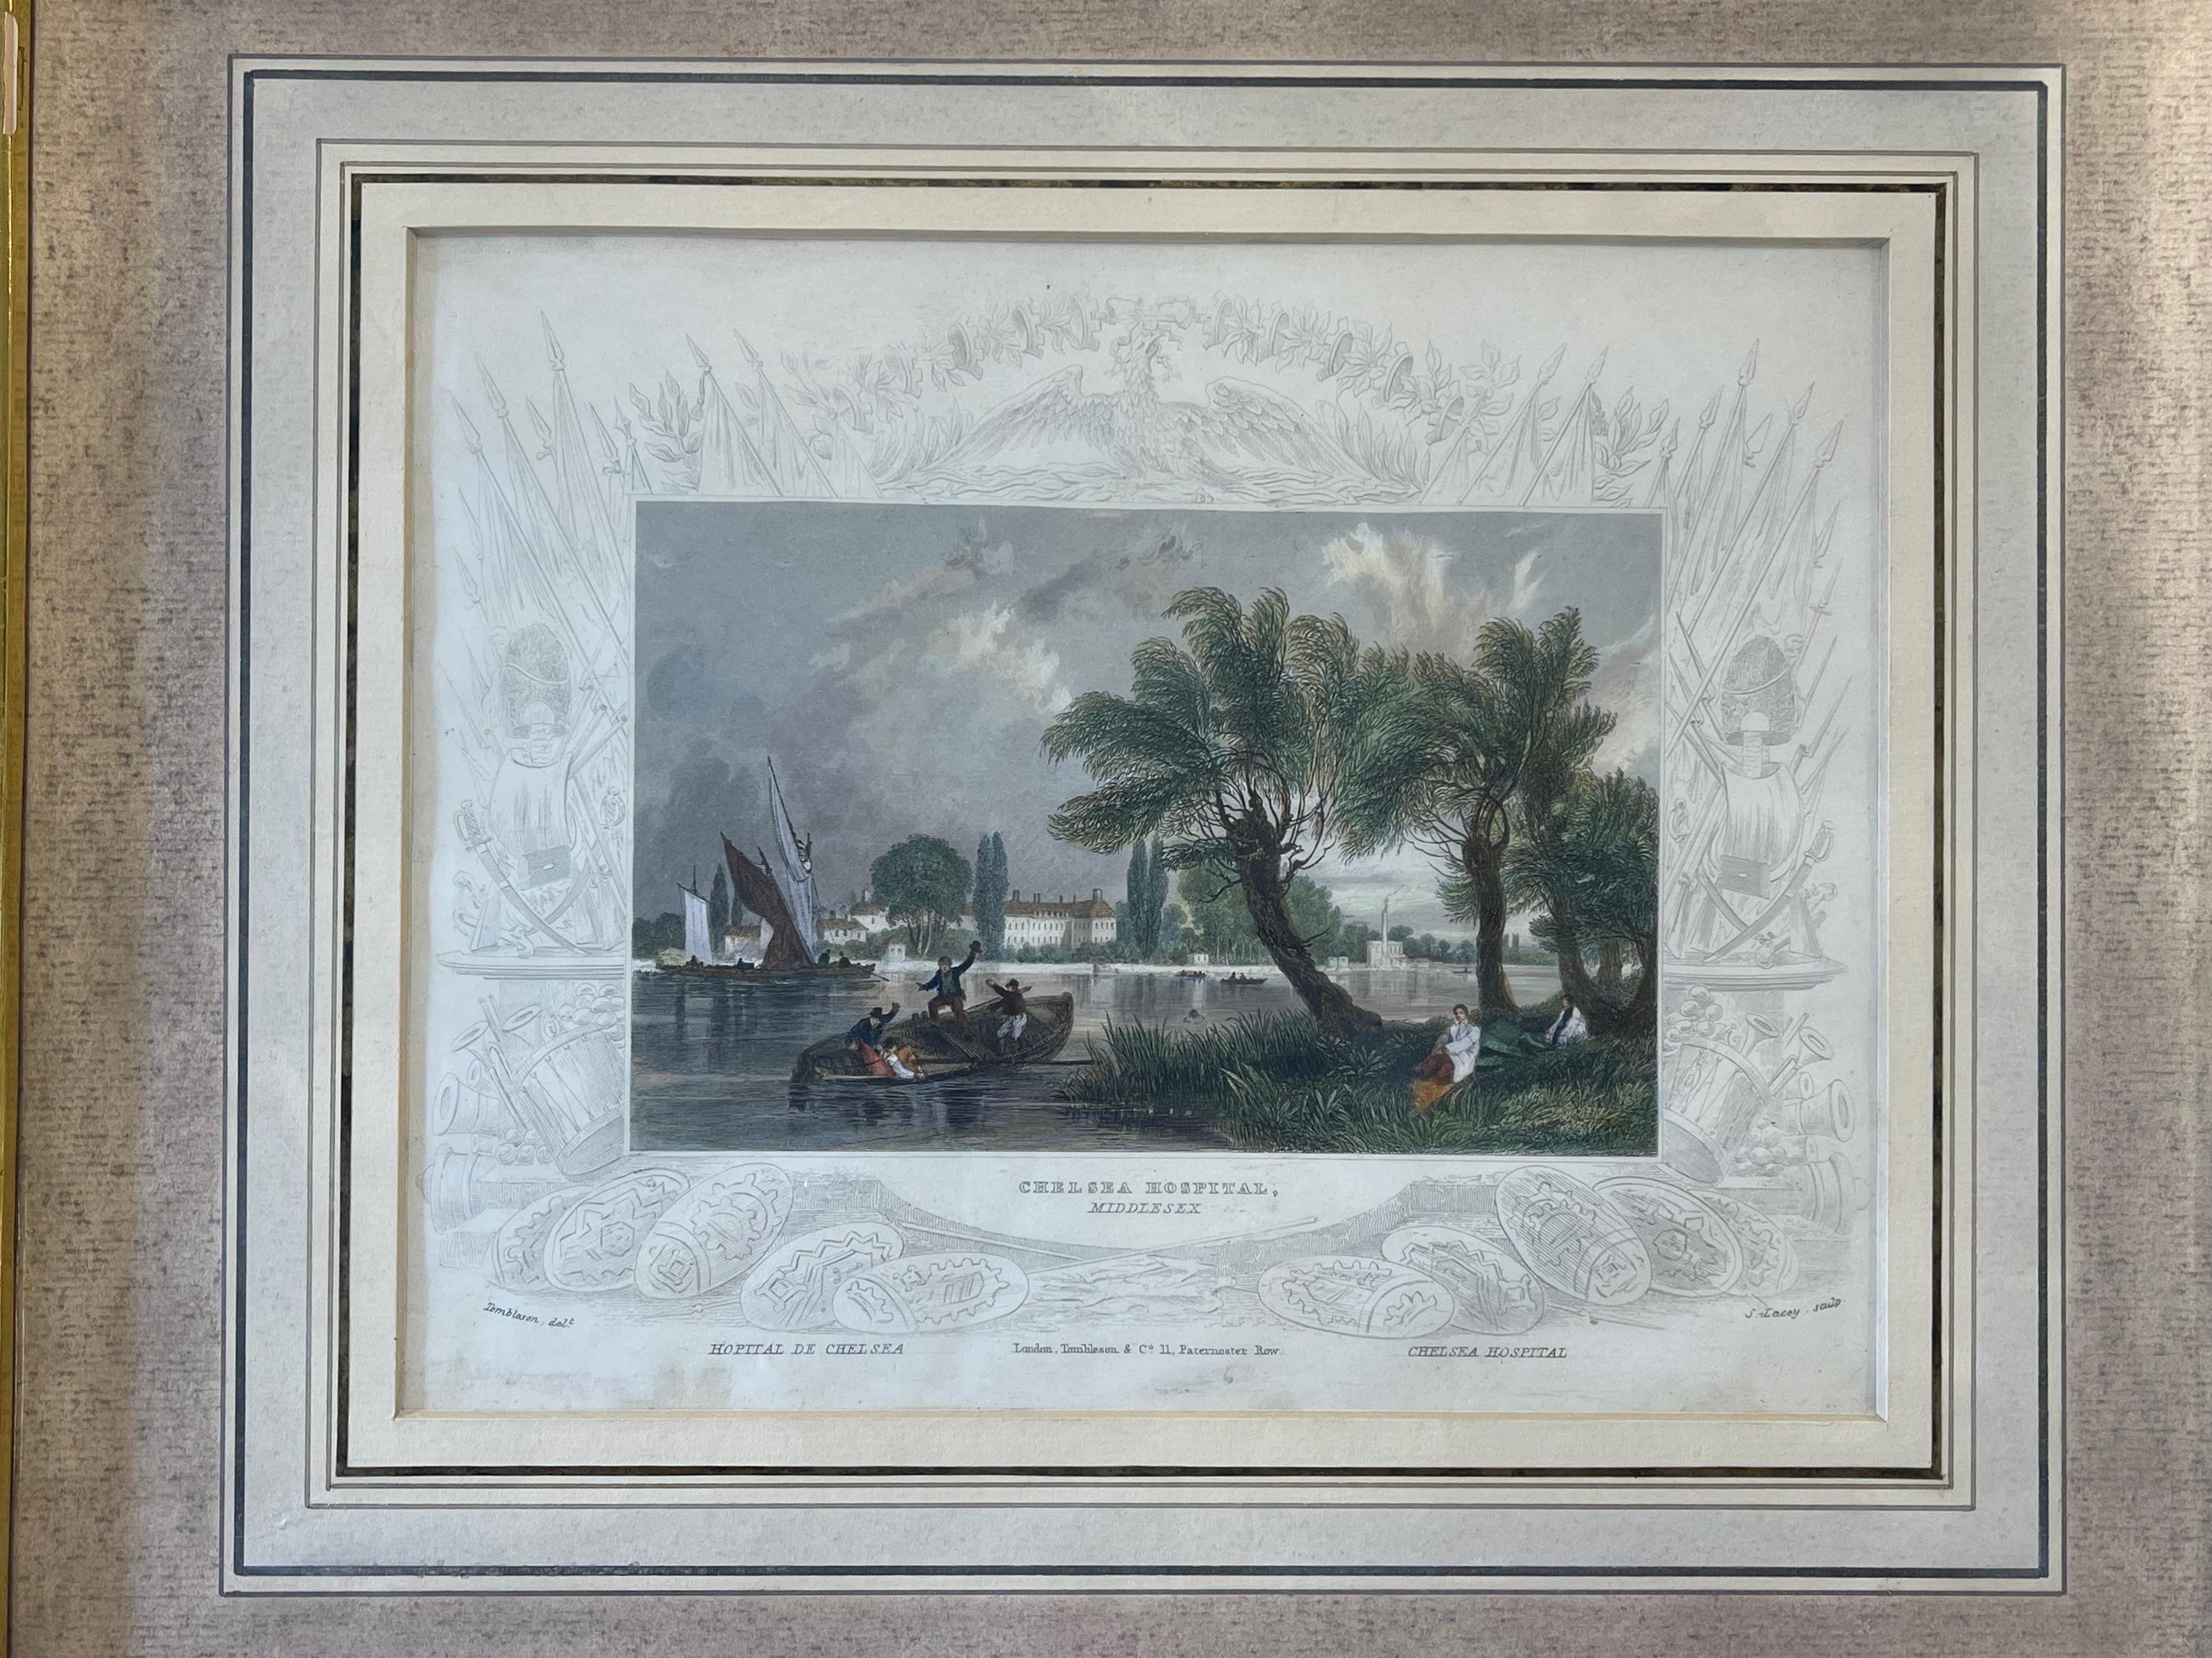 Antique Engraving “Chelsea Hospital, Middlesex” Giltwood Frame Circa 1834

William Tombleson (l. 18th - 19th c) & Samuel Lacey (1786-1859) engravers.  The print has an elaborate separate border depicting military equipment: swords, shields,